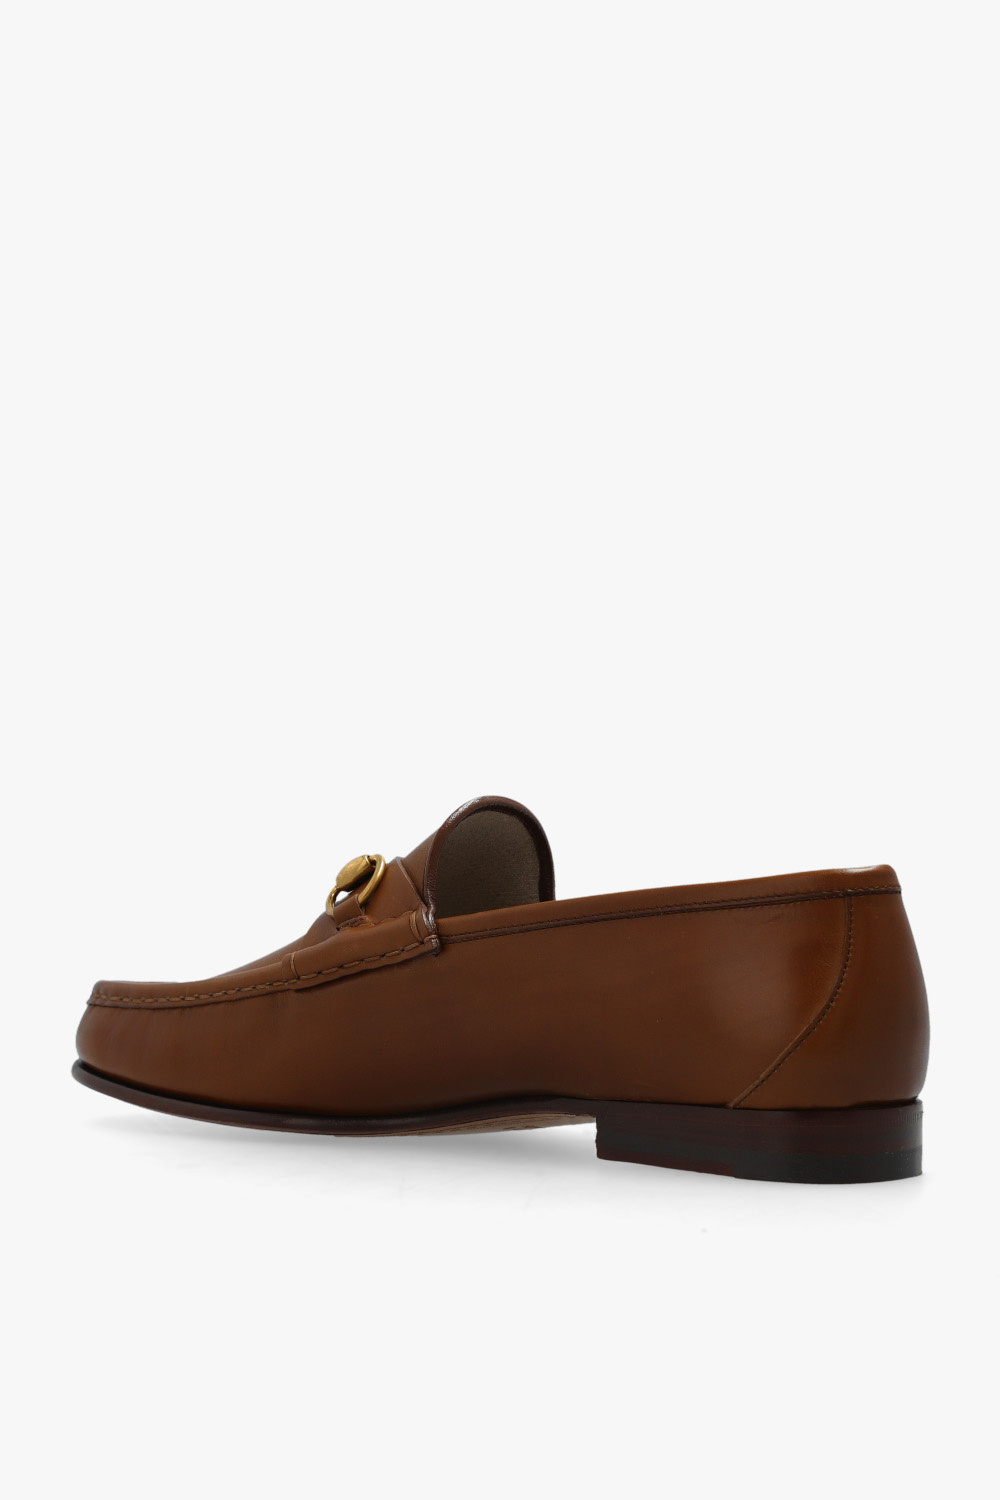 Gucci ‘1953 POLO’ leather loafers